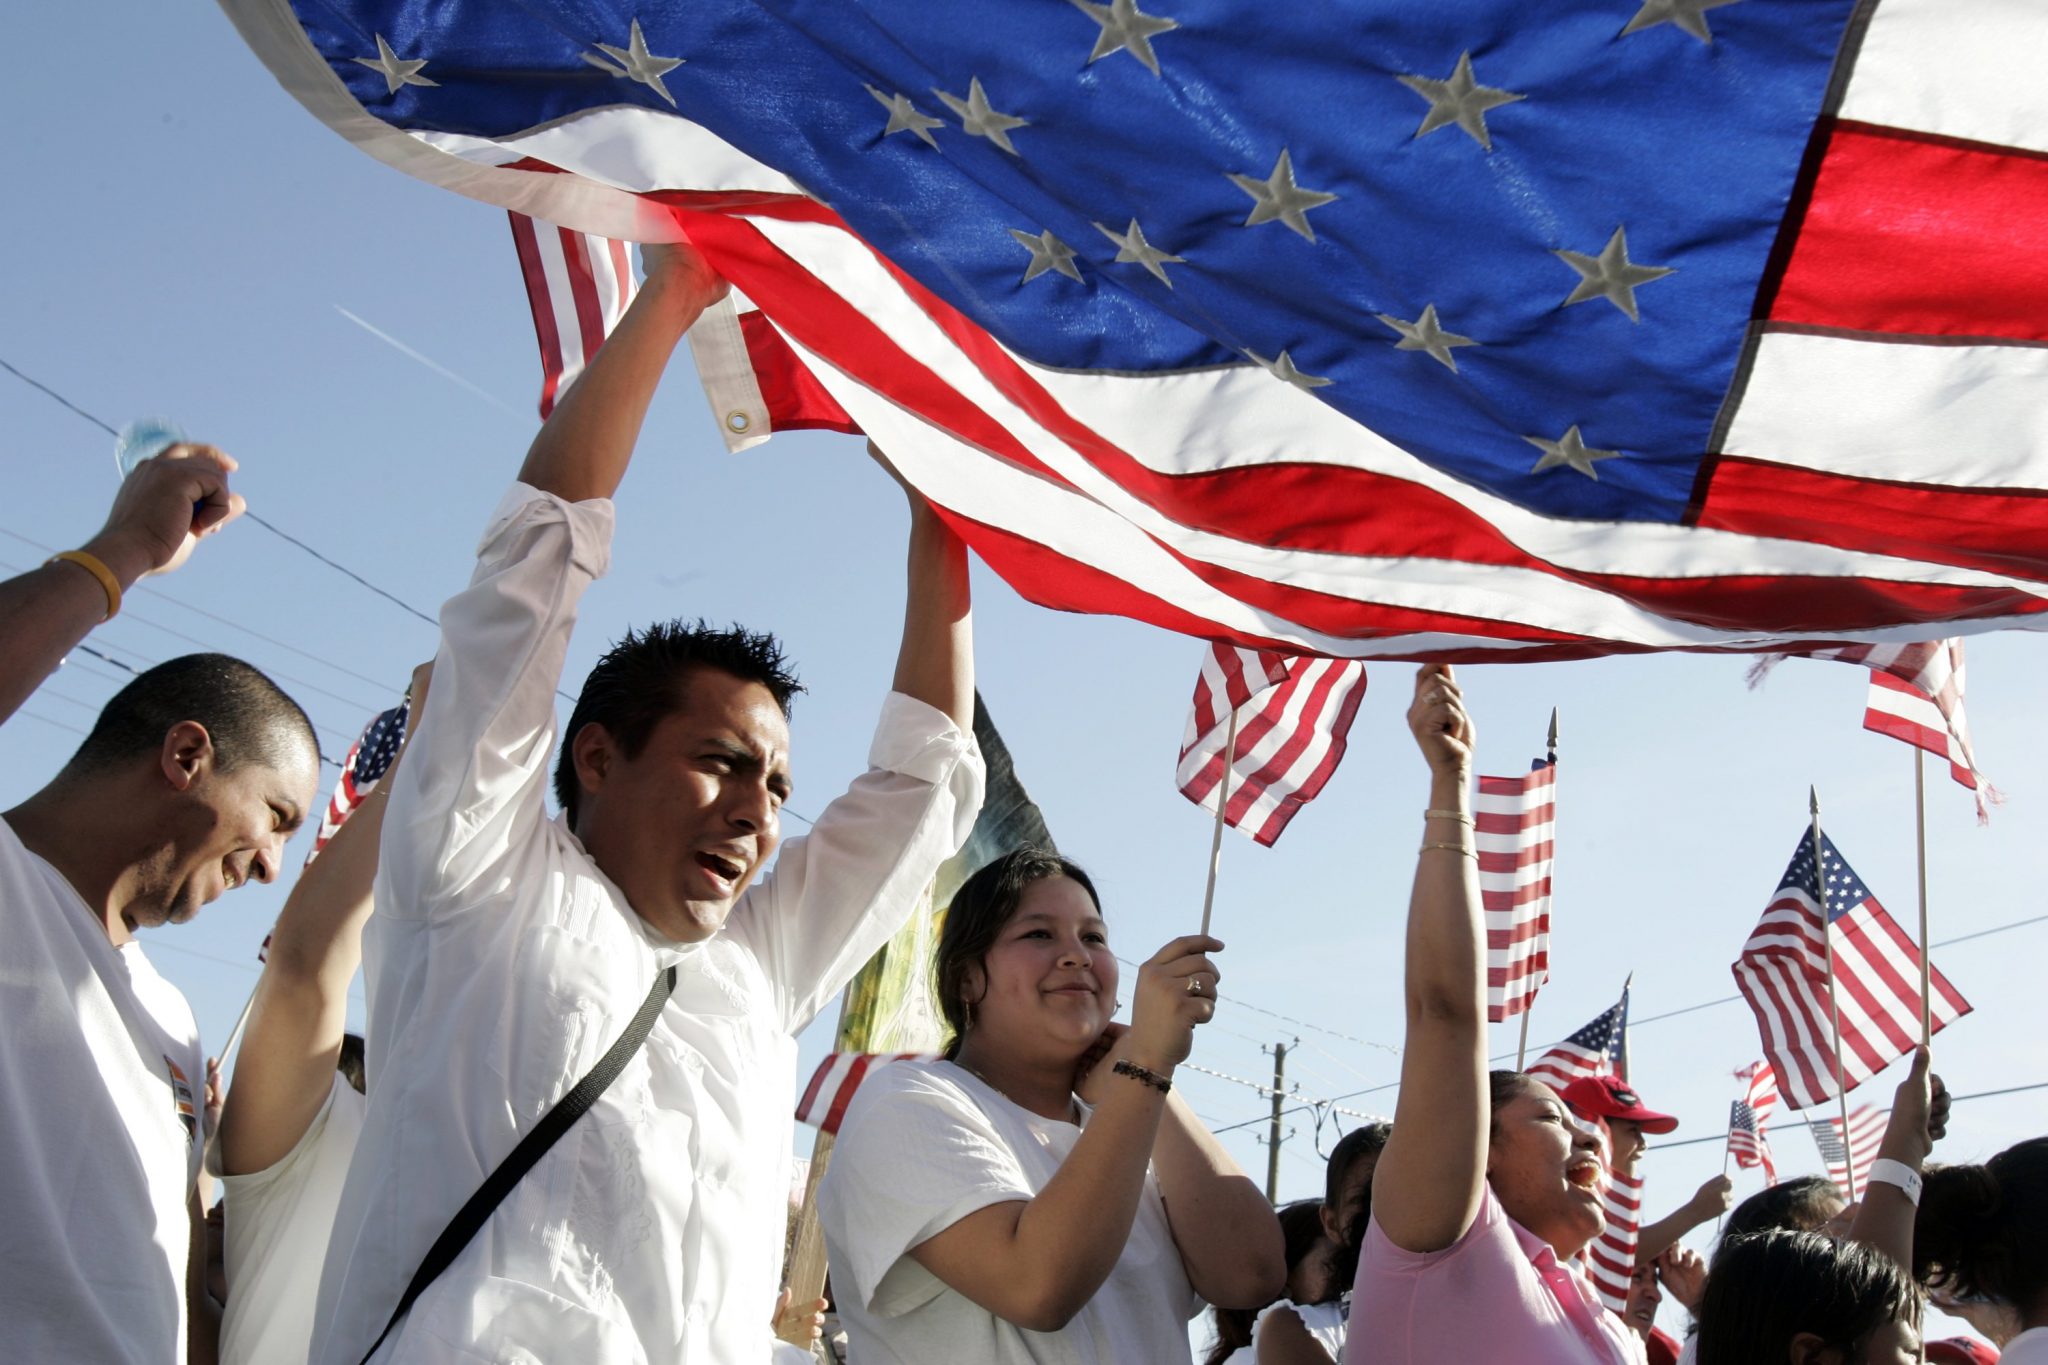 What Are the Most Anticipated Amendments in USA’s Immigrant Policy?